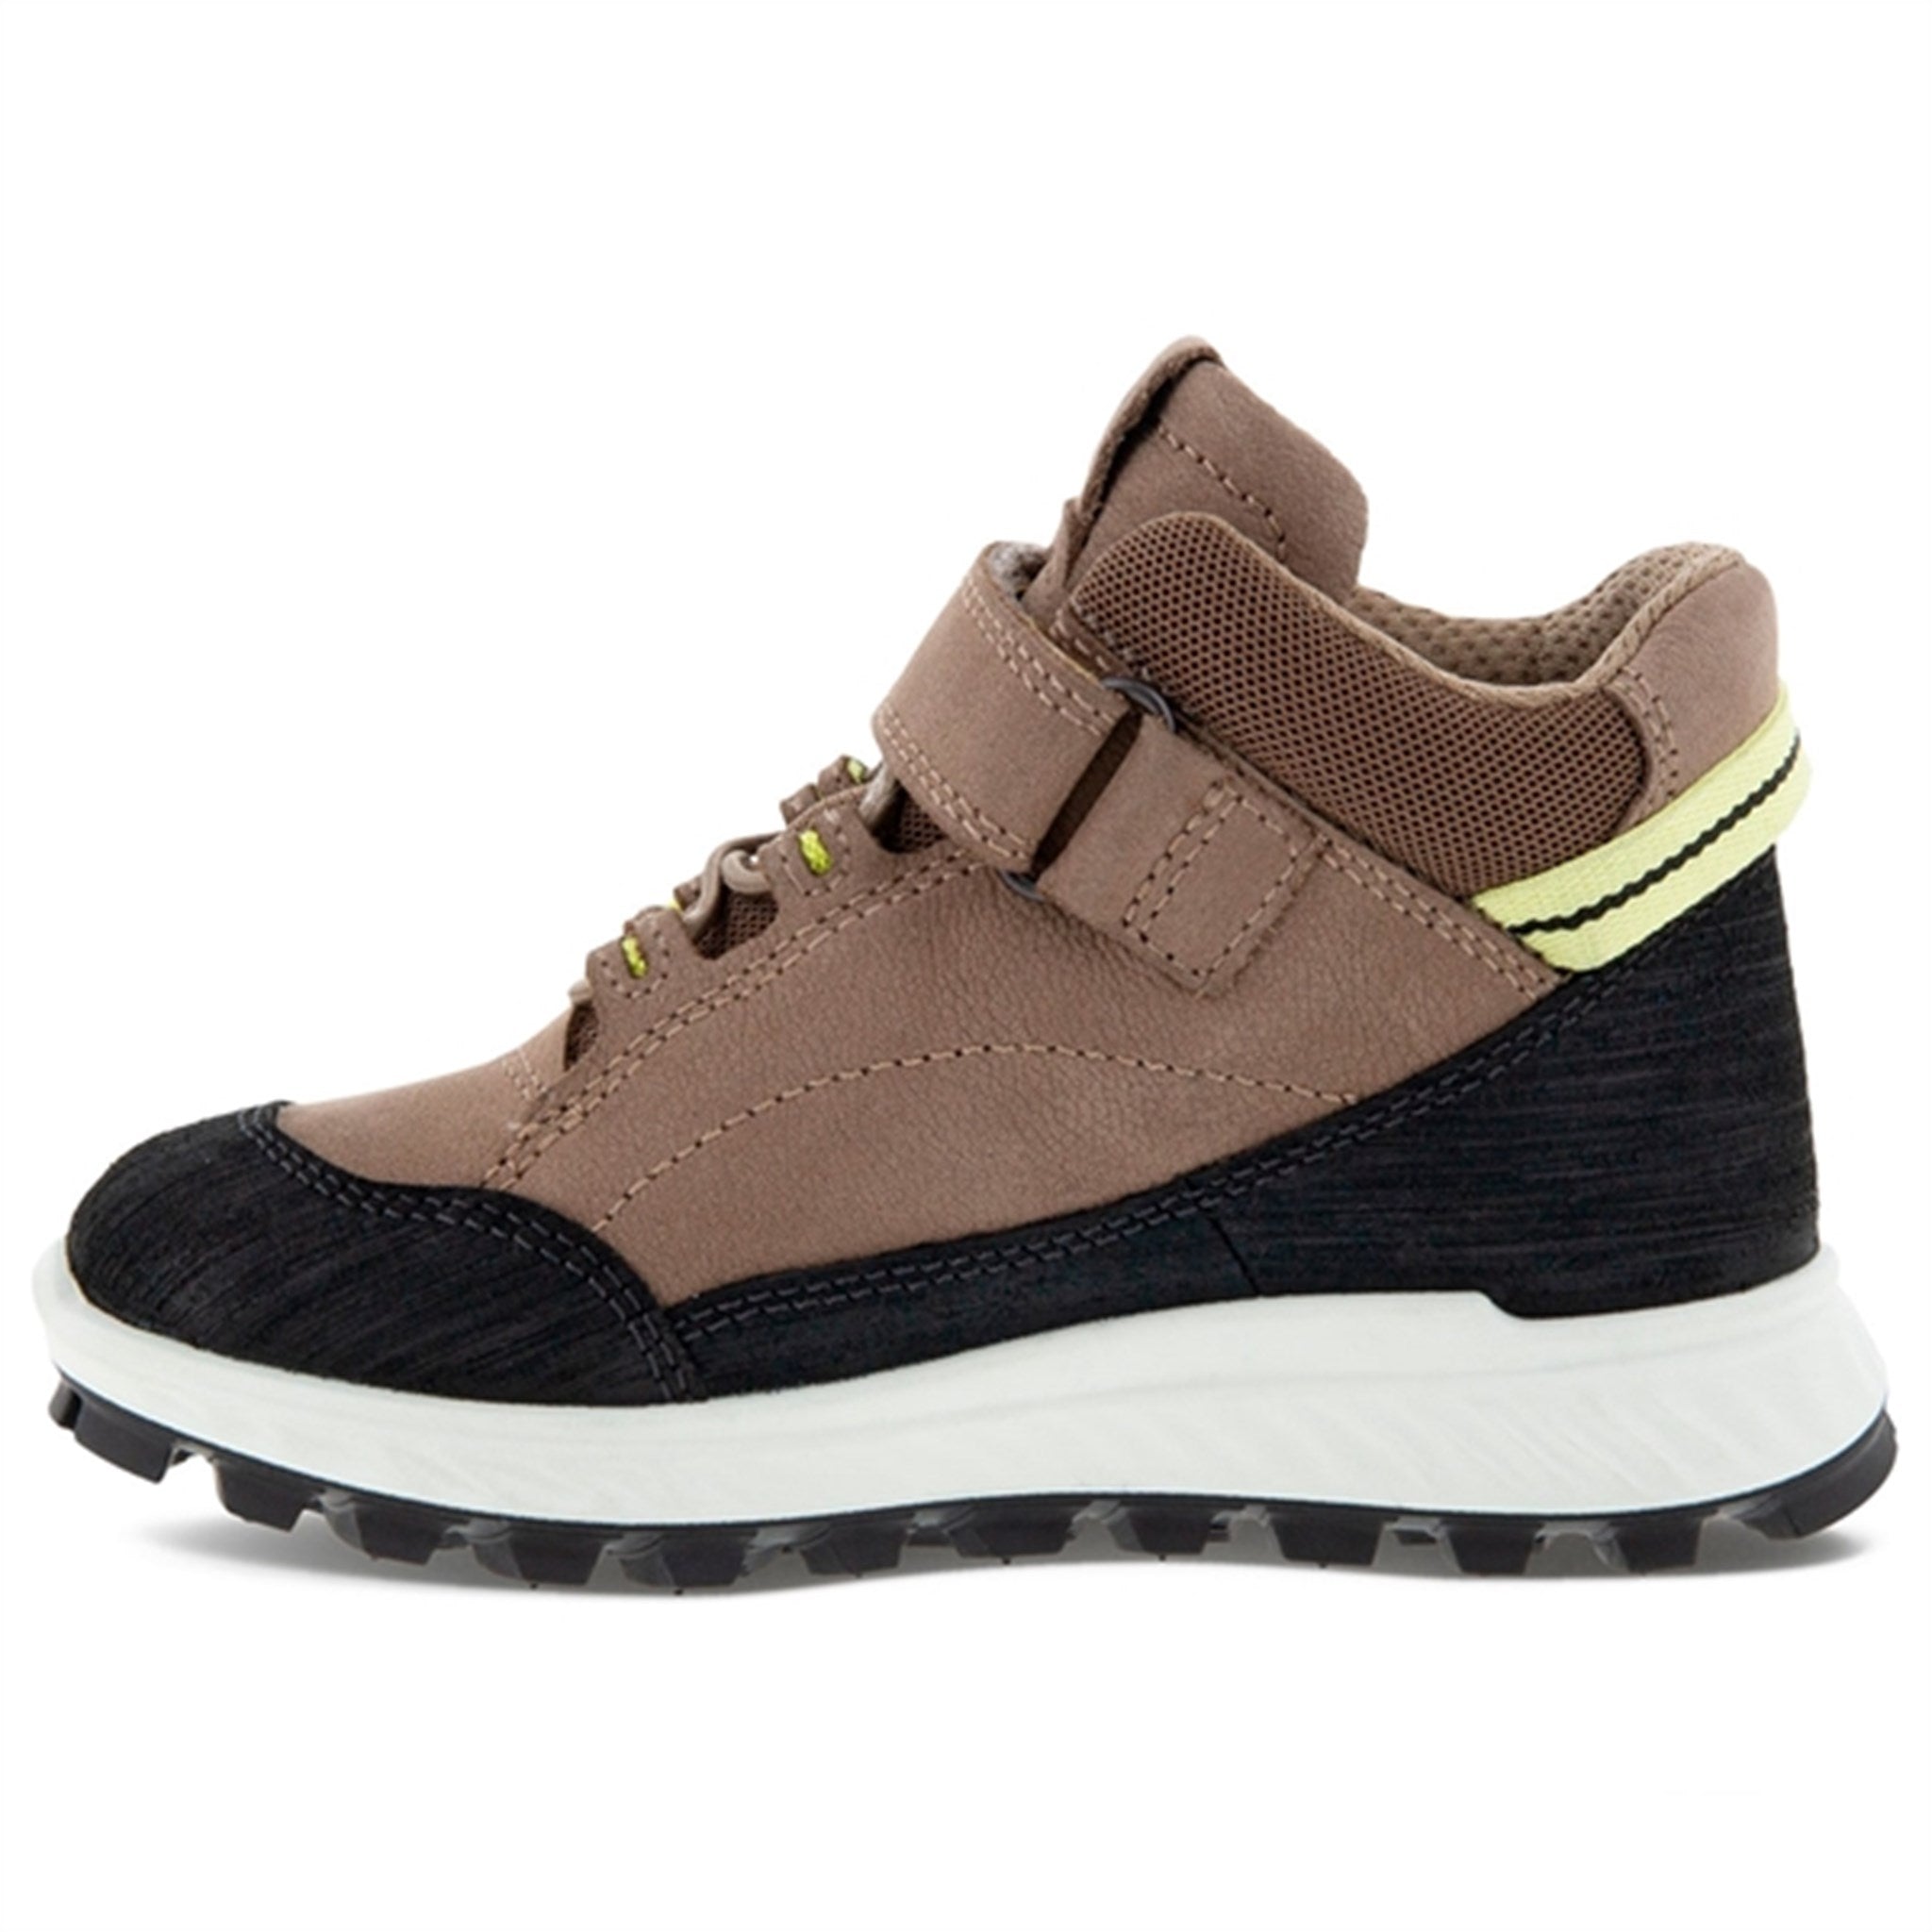 Ecco Exostrike Kids Ankle Boot Black/Taupe/Taupe 4